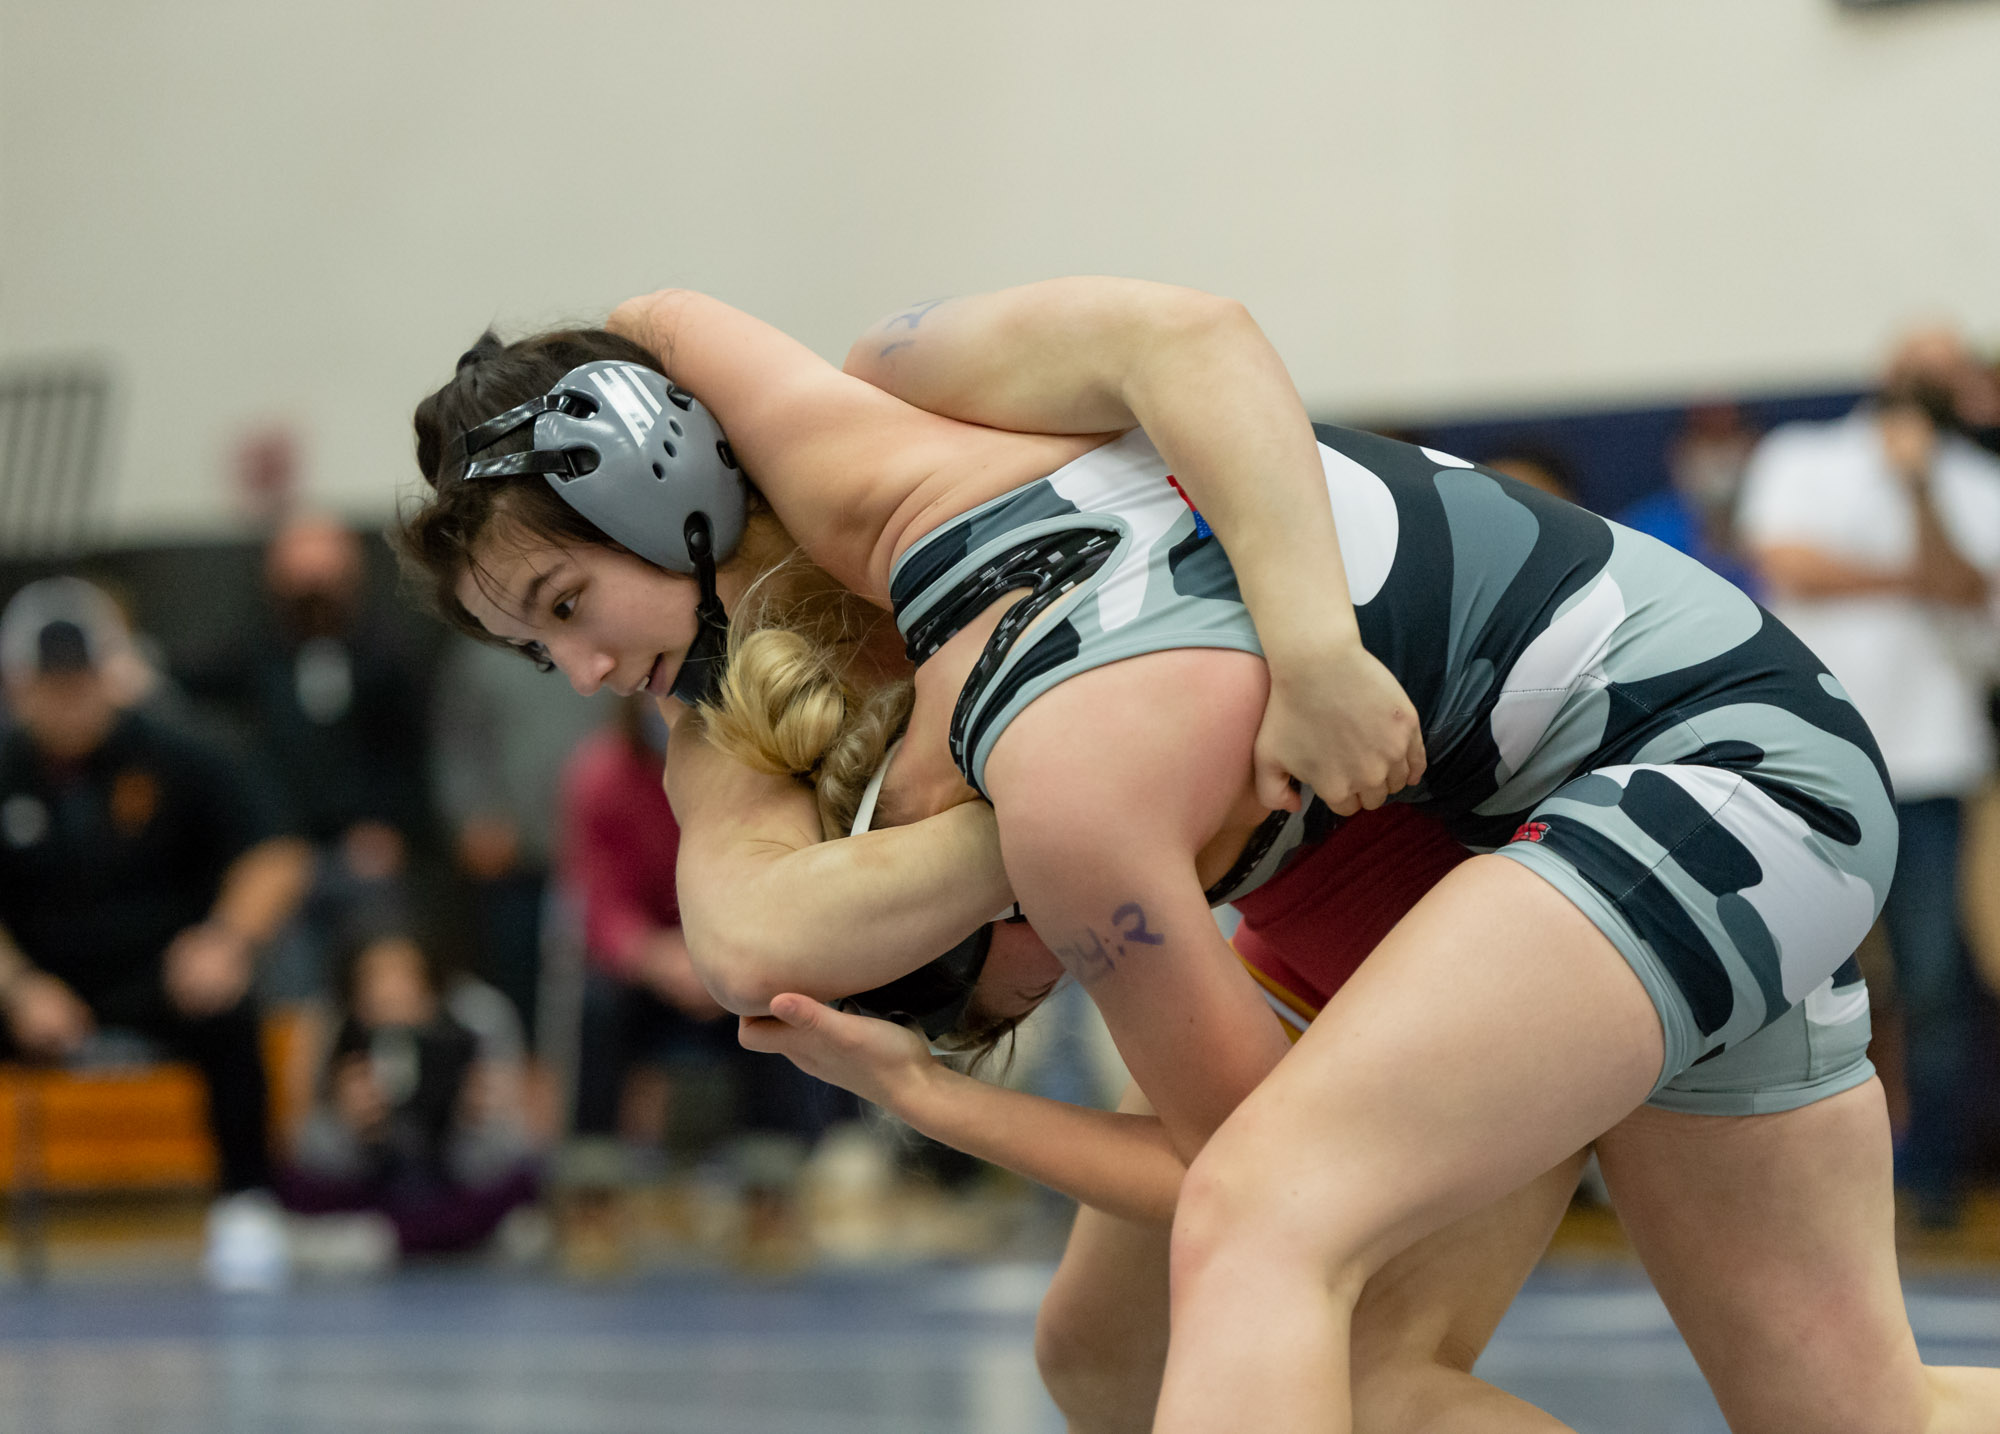 Prairie's Kennedy Wilcox throws Union's Niah Cassidy in the 125-pound finals at the Norm Friehauf Clark County Championships on Saturday, Jan. 15, 2022, at Skyview High School.